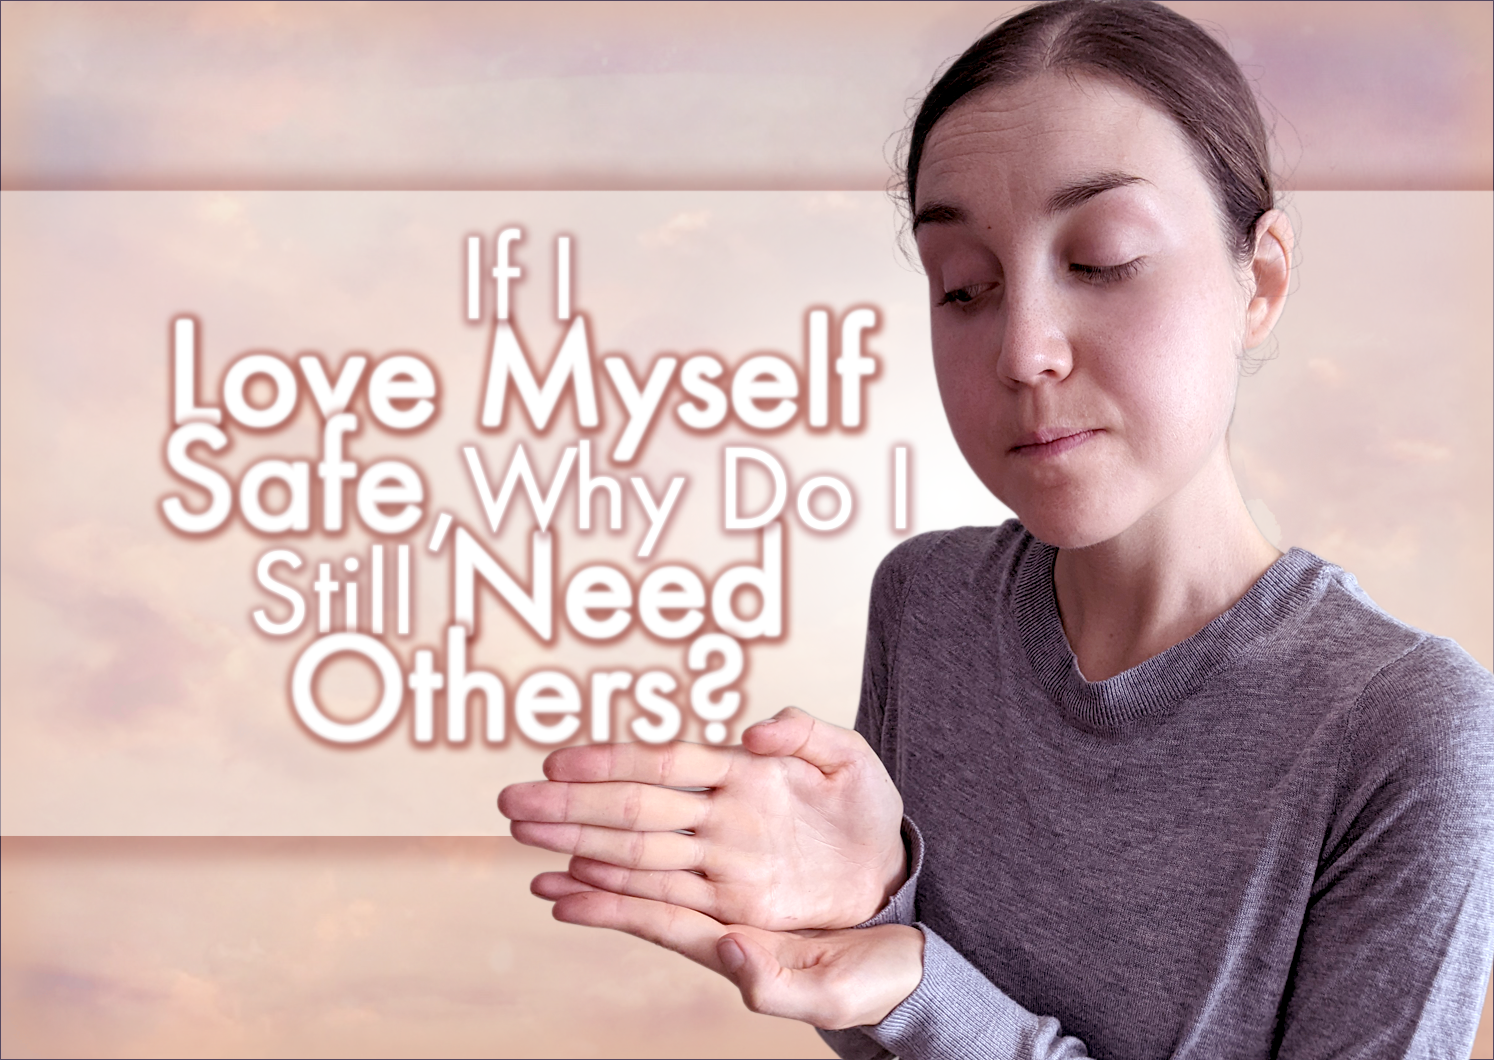 If I Love Myself Safe, Why Do I Still Need Others?